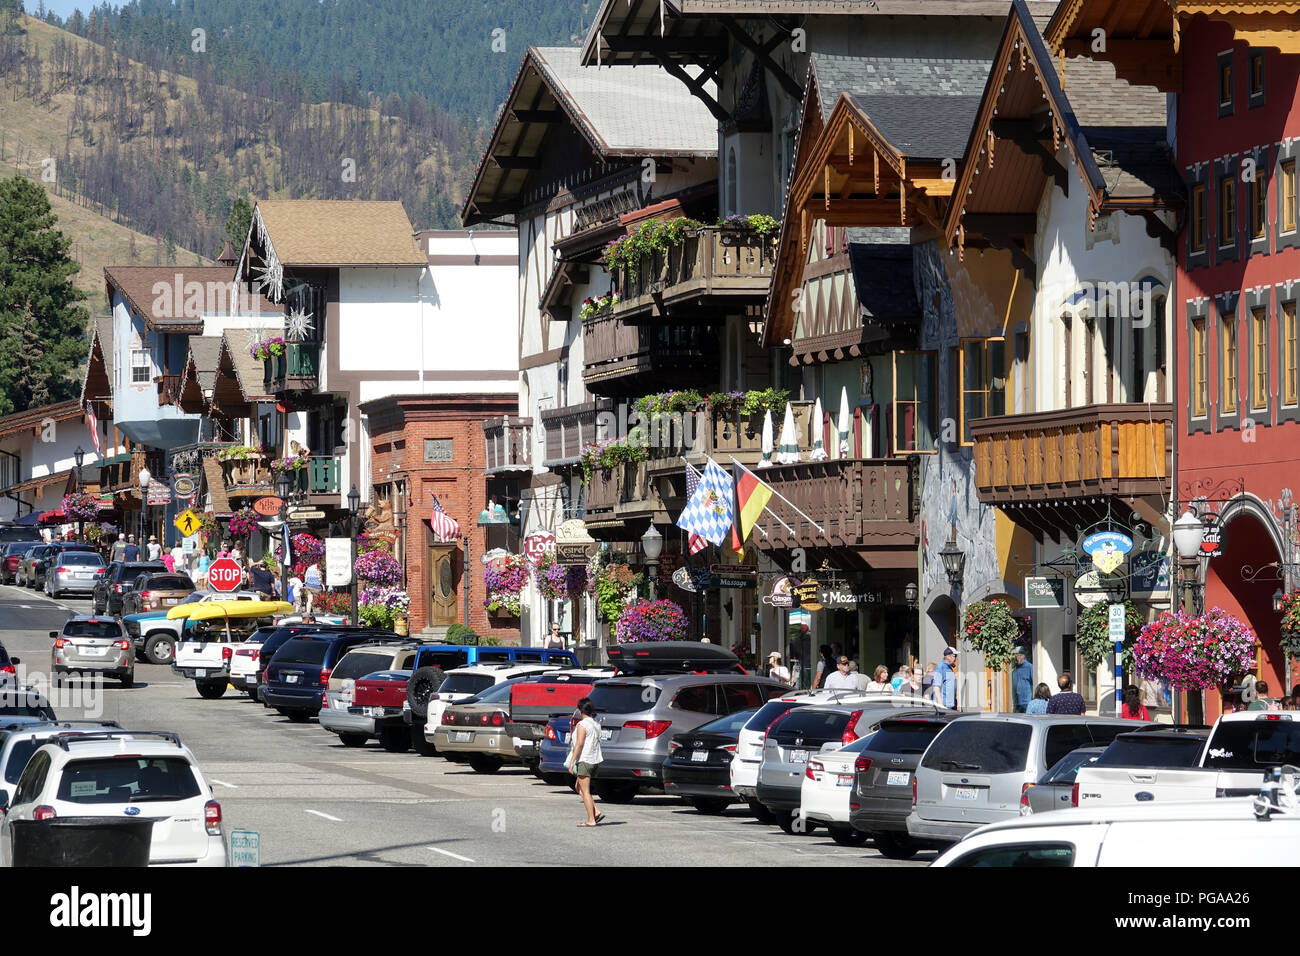 Leavenworth Washington is a Bavarian Theme Town on the eastern slopes of the Cascade Mountains two hours away from Seattle region. Leavenworth has a h Stock Photo